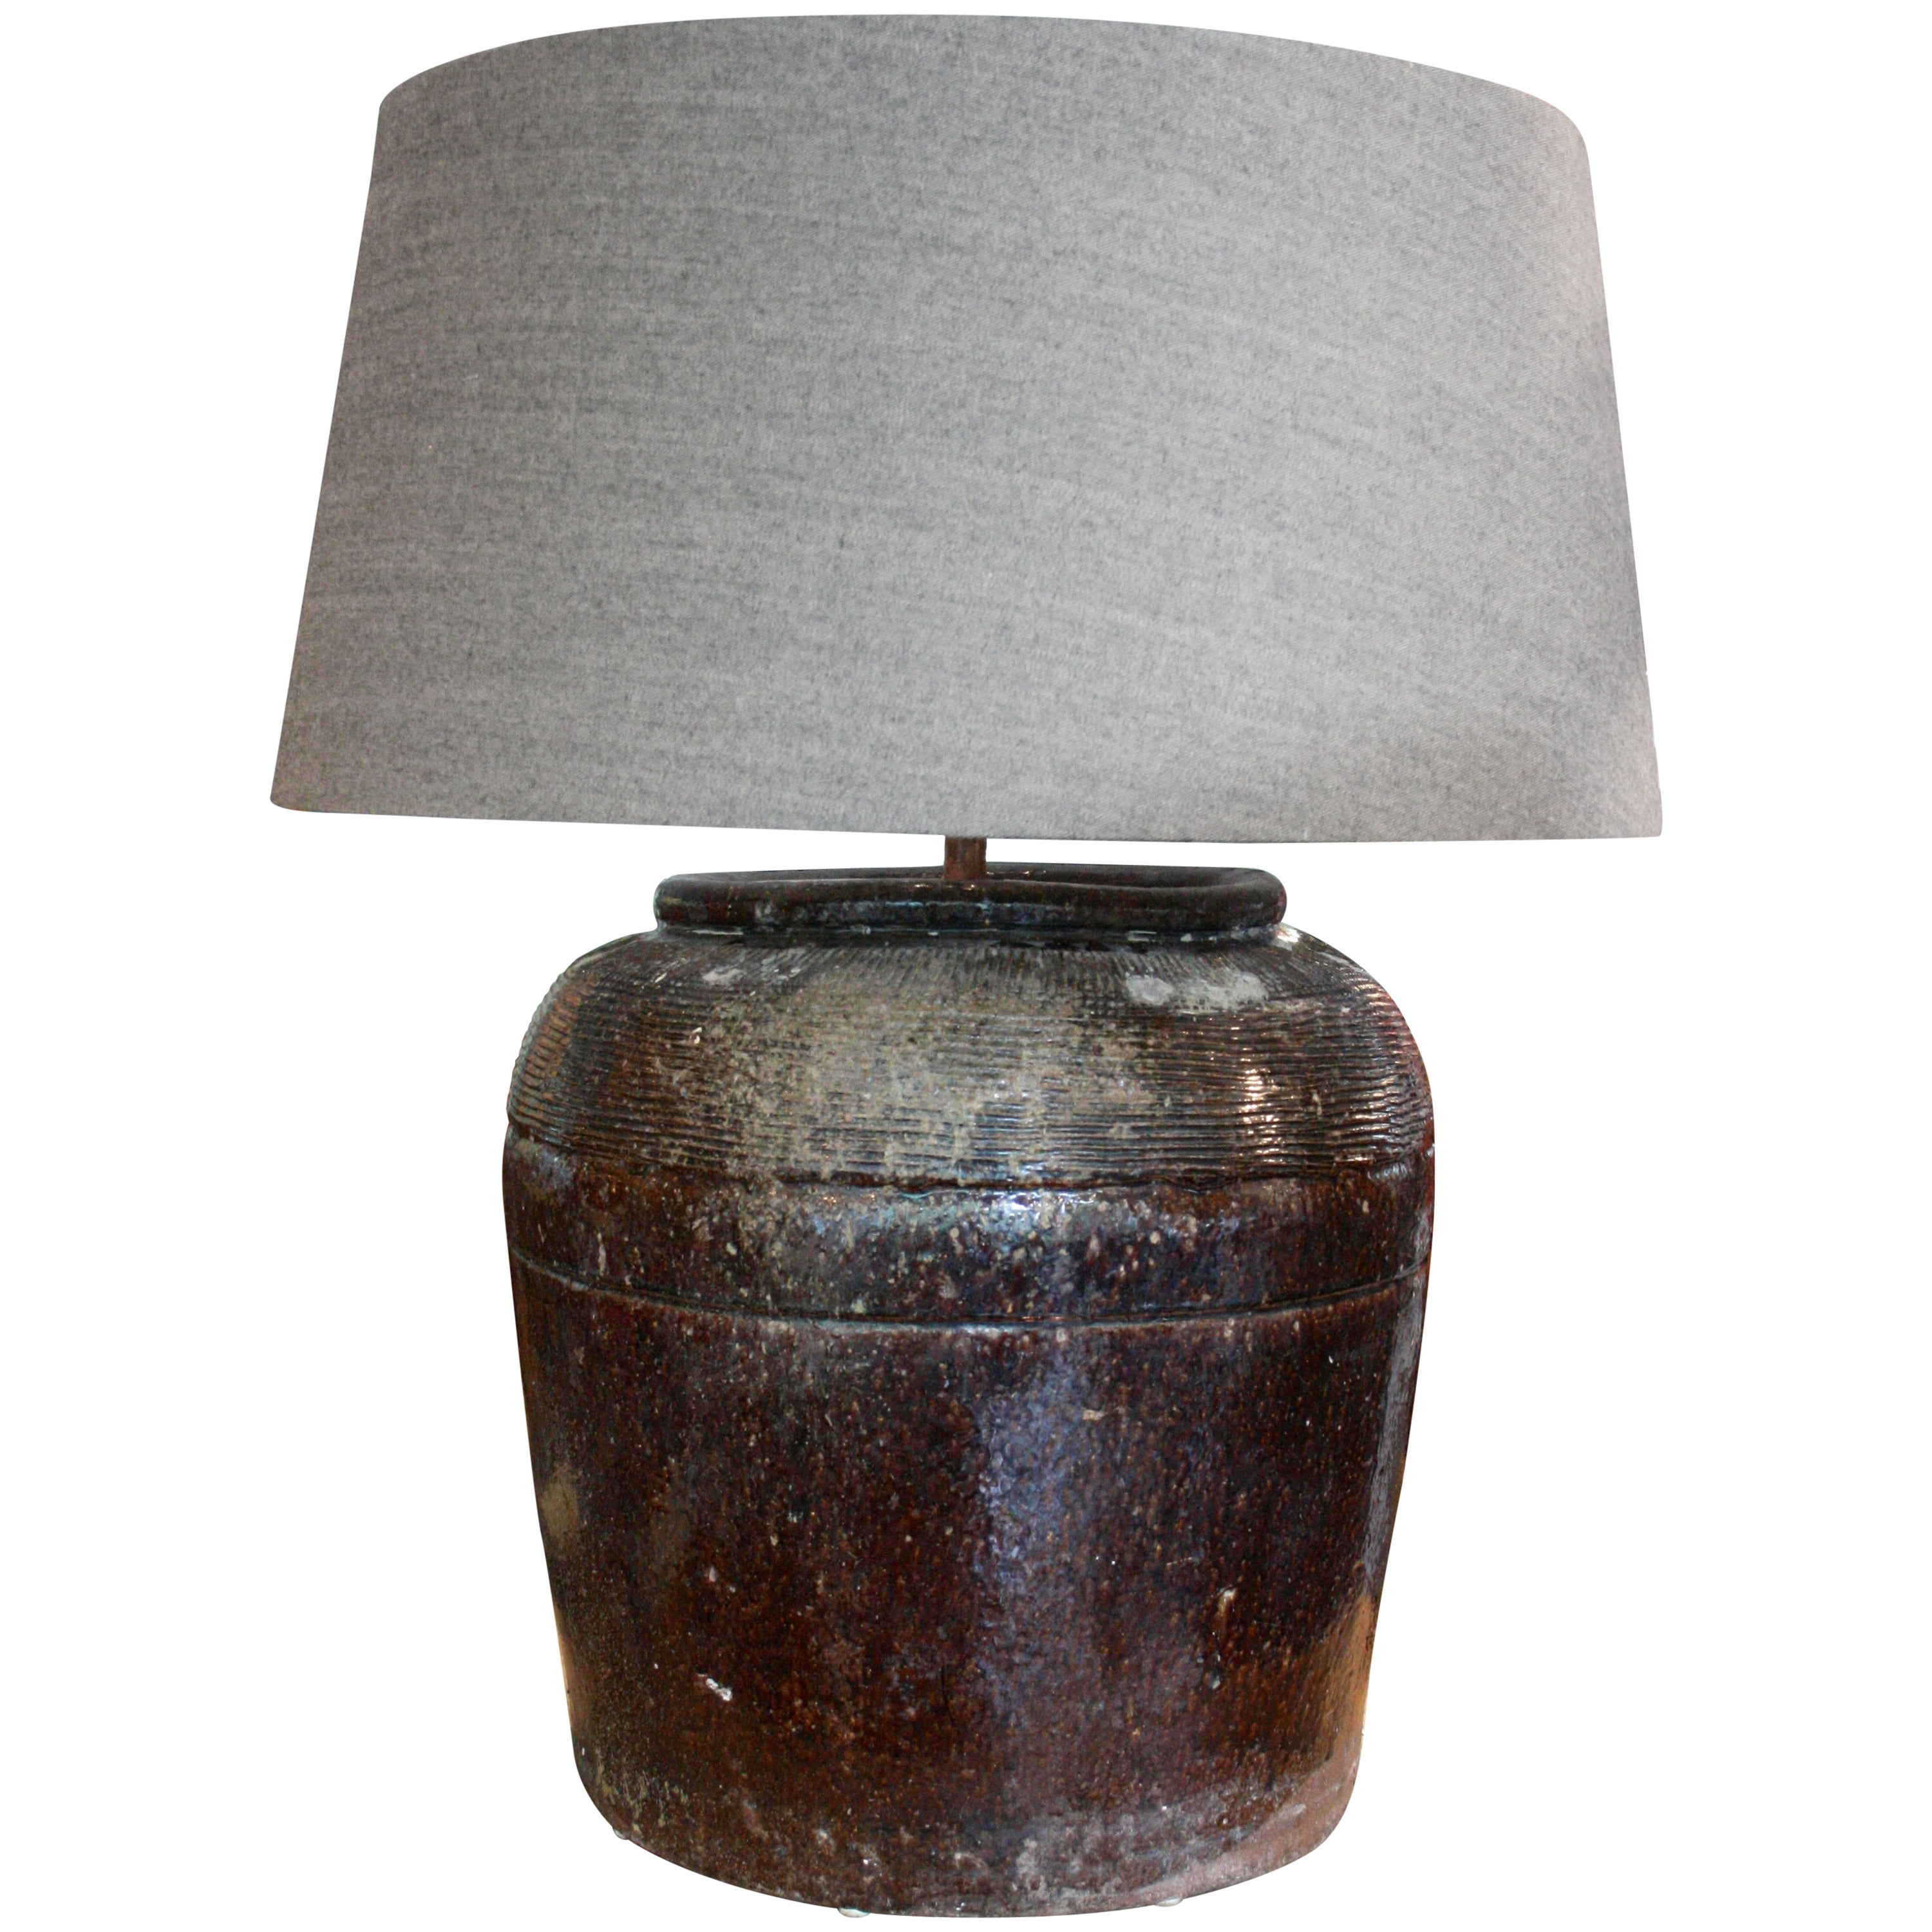 Massive French Glazed Earthenware Table Lamp